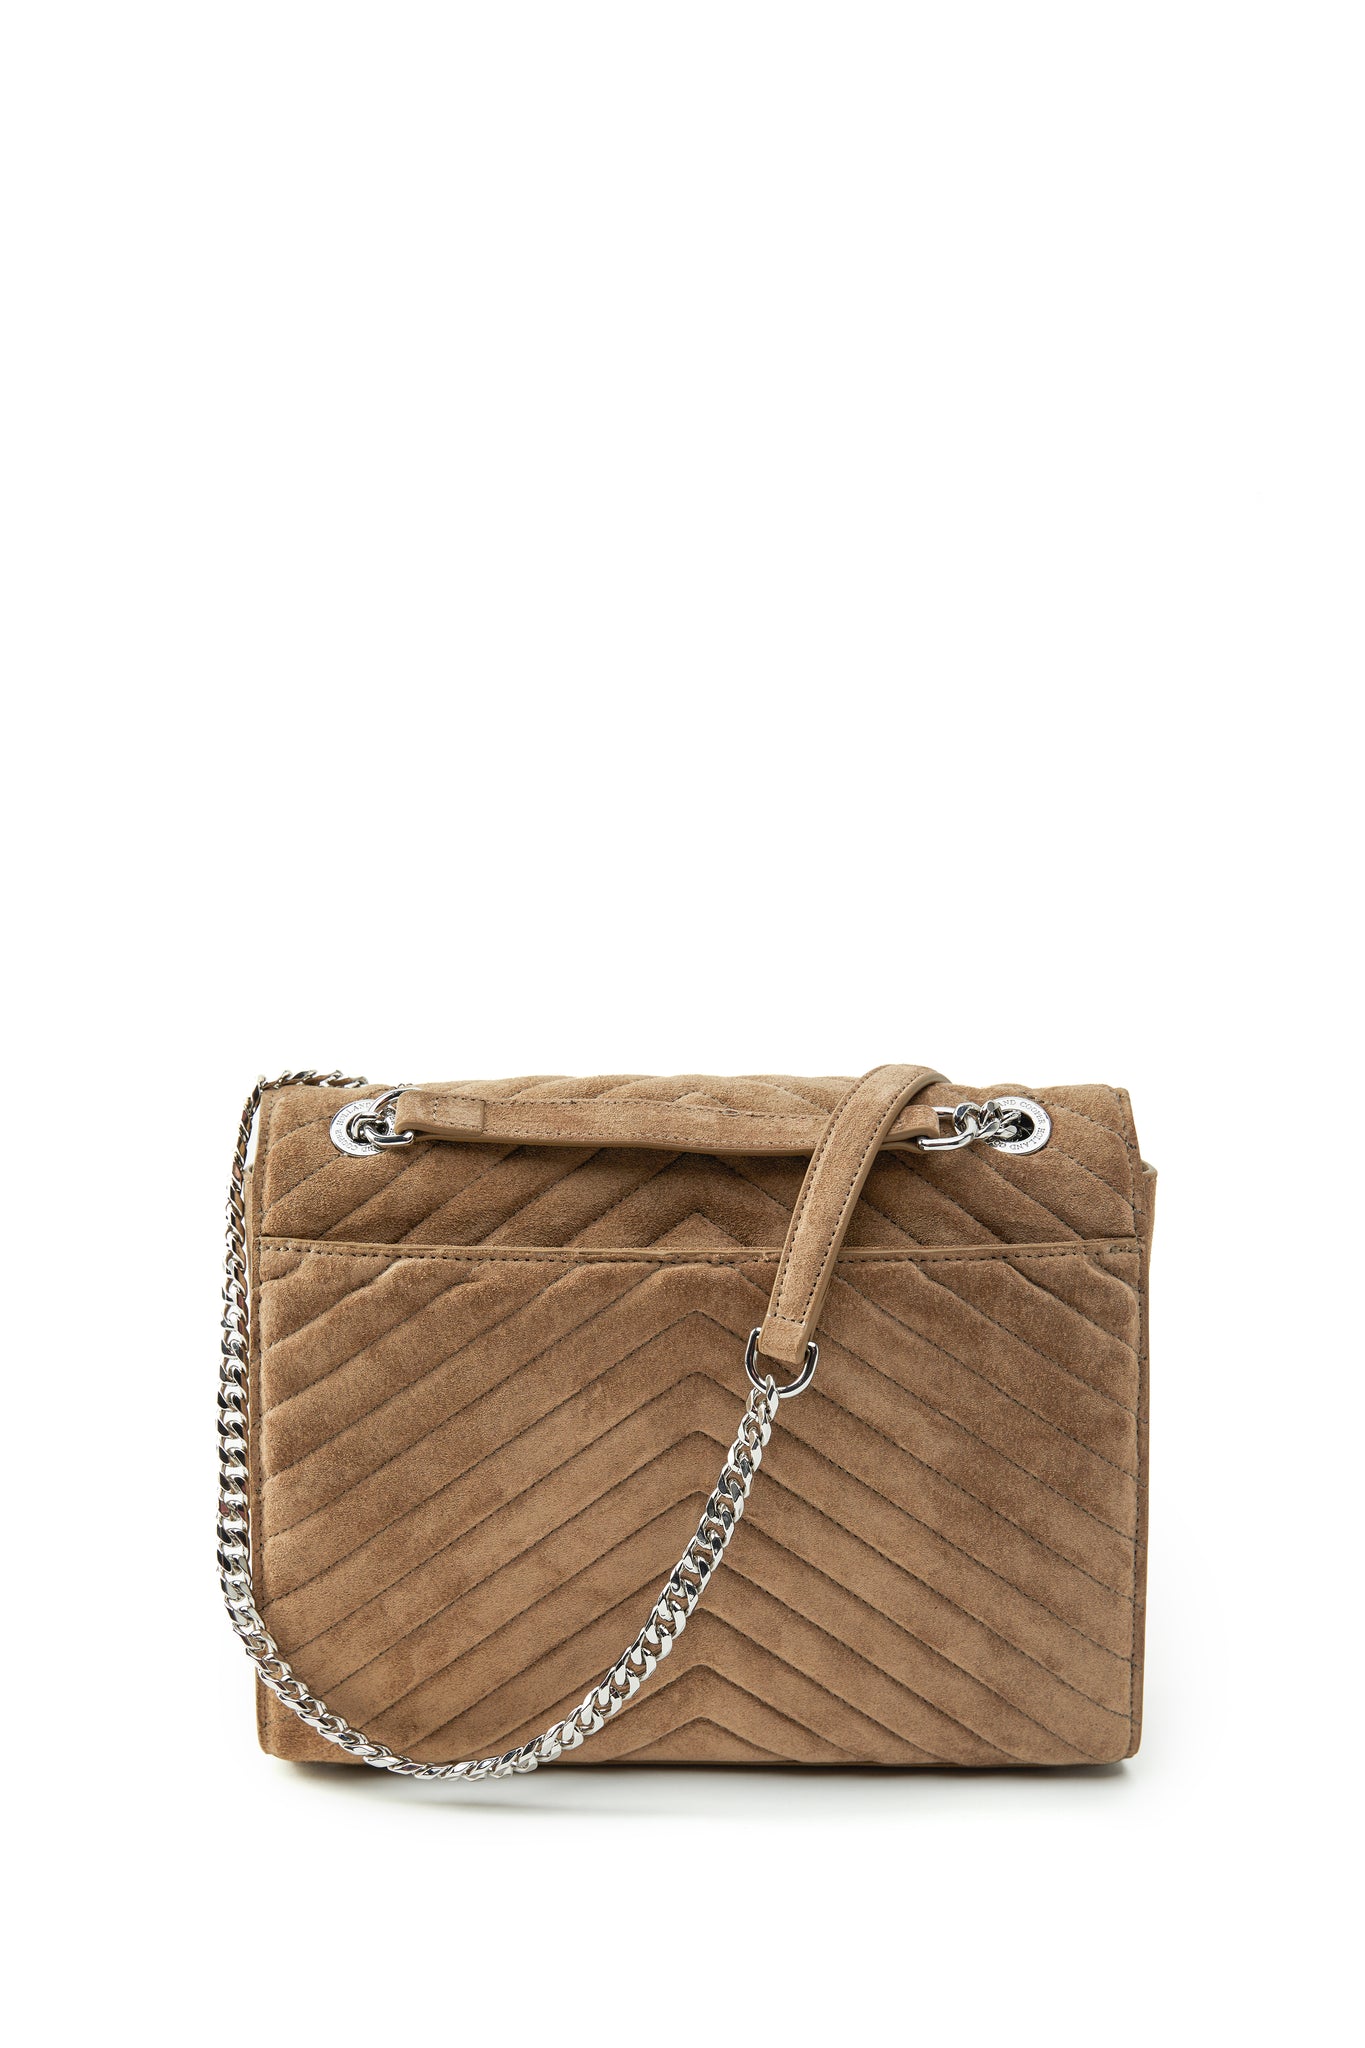 back of taupe suede shoulder bag with silver hardware and chain